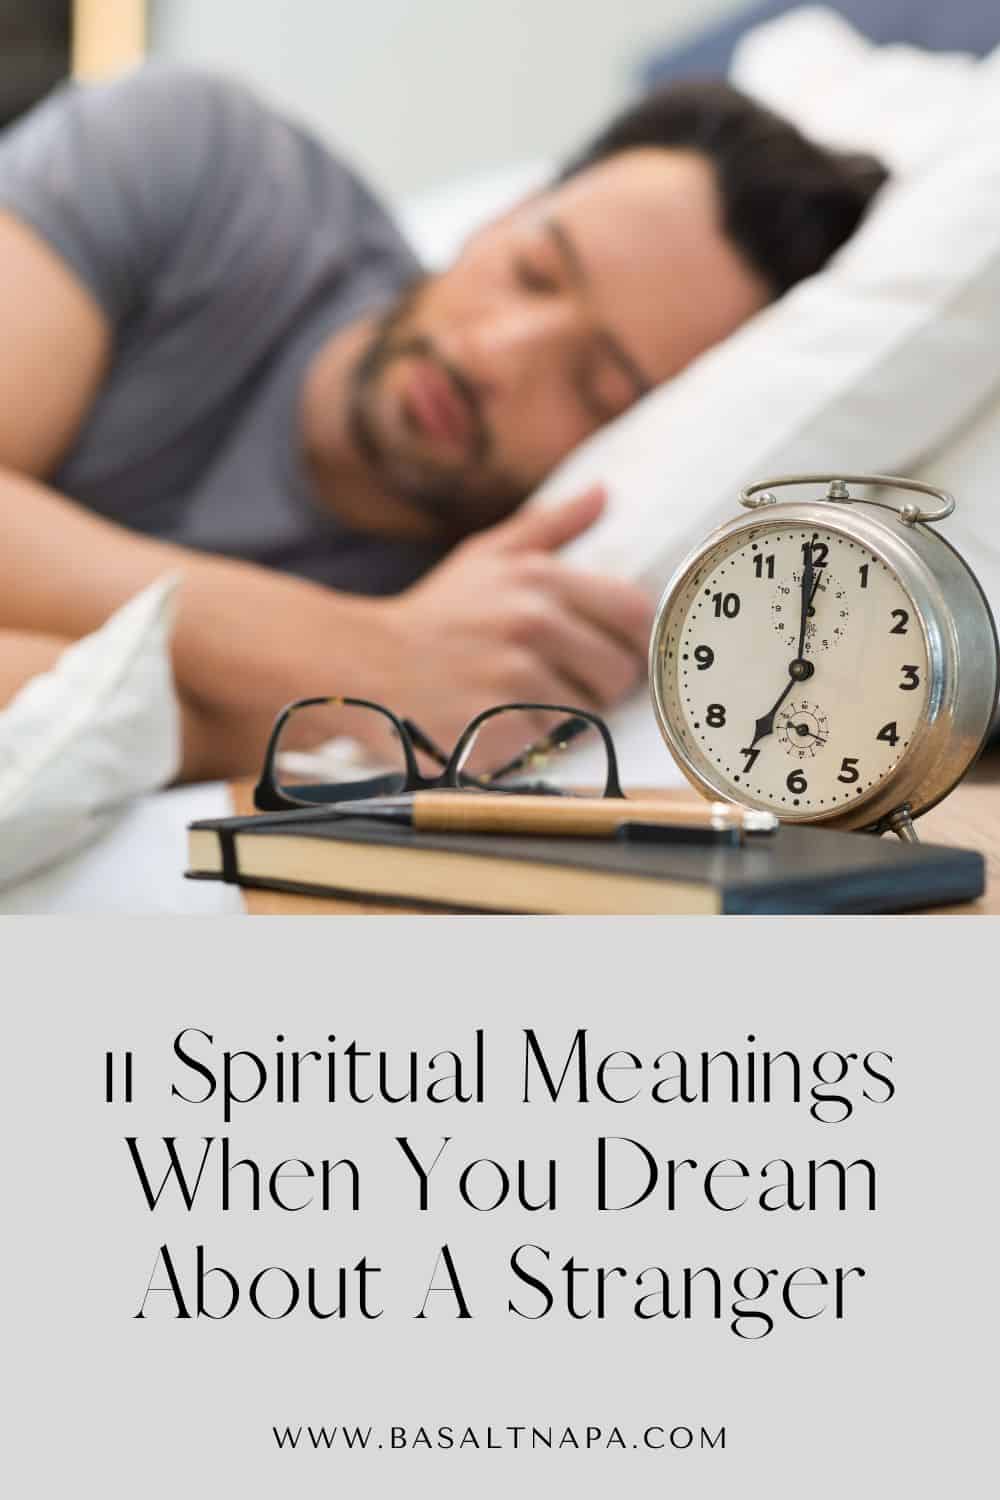 11 Spiritual Meanings When You Dream About A Stranger